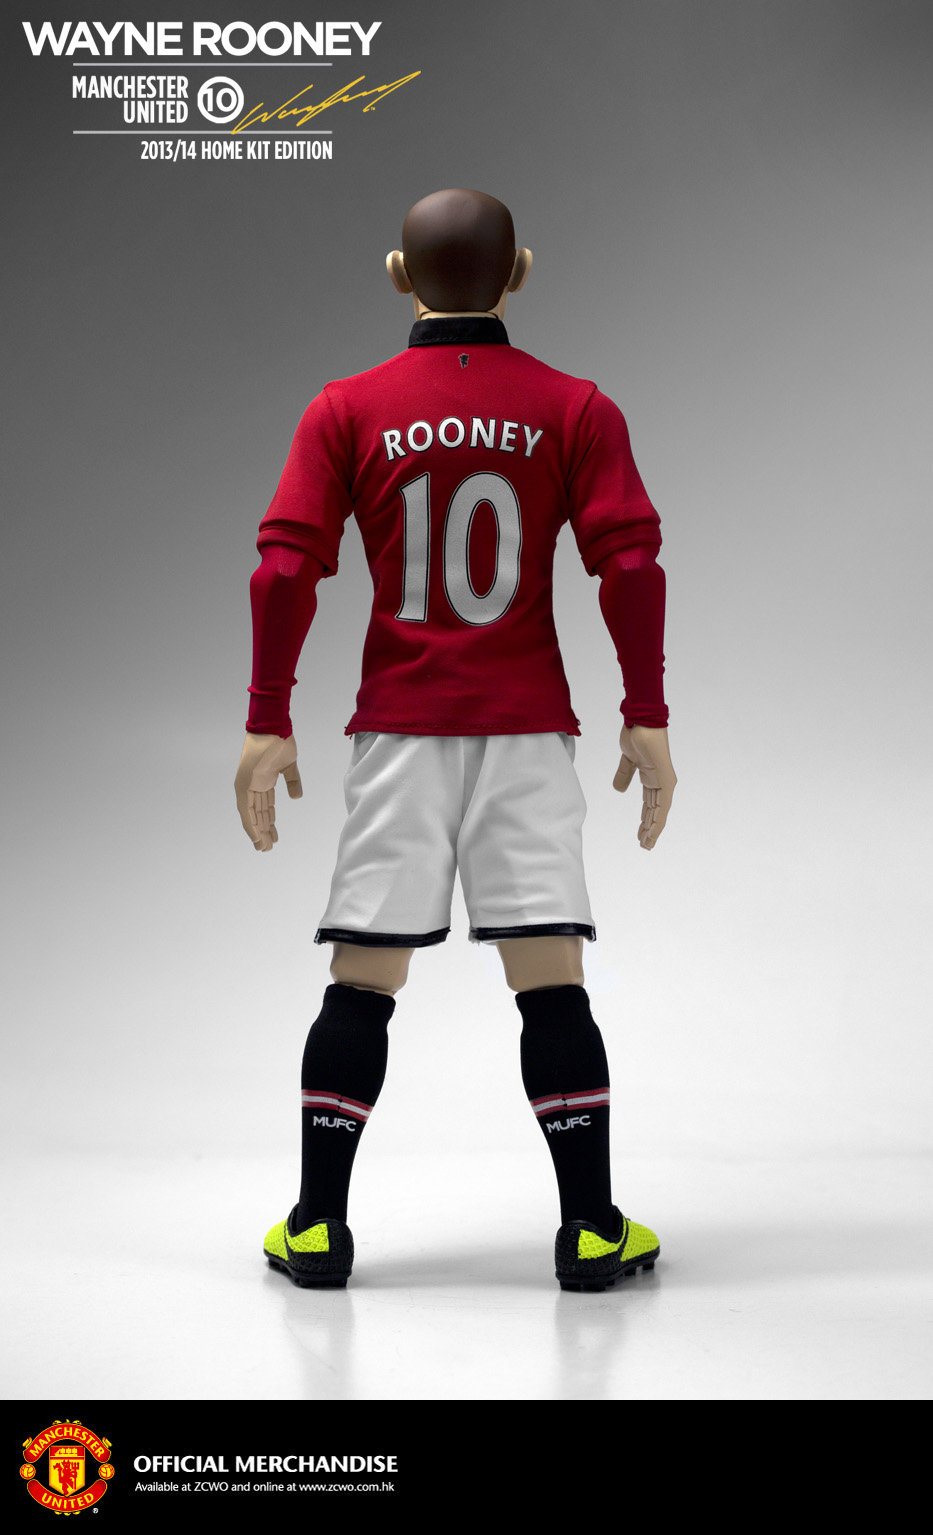 IMINIME/ZC WORLD - MANCHESTER UNITED - Page 3 Pf8s